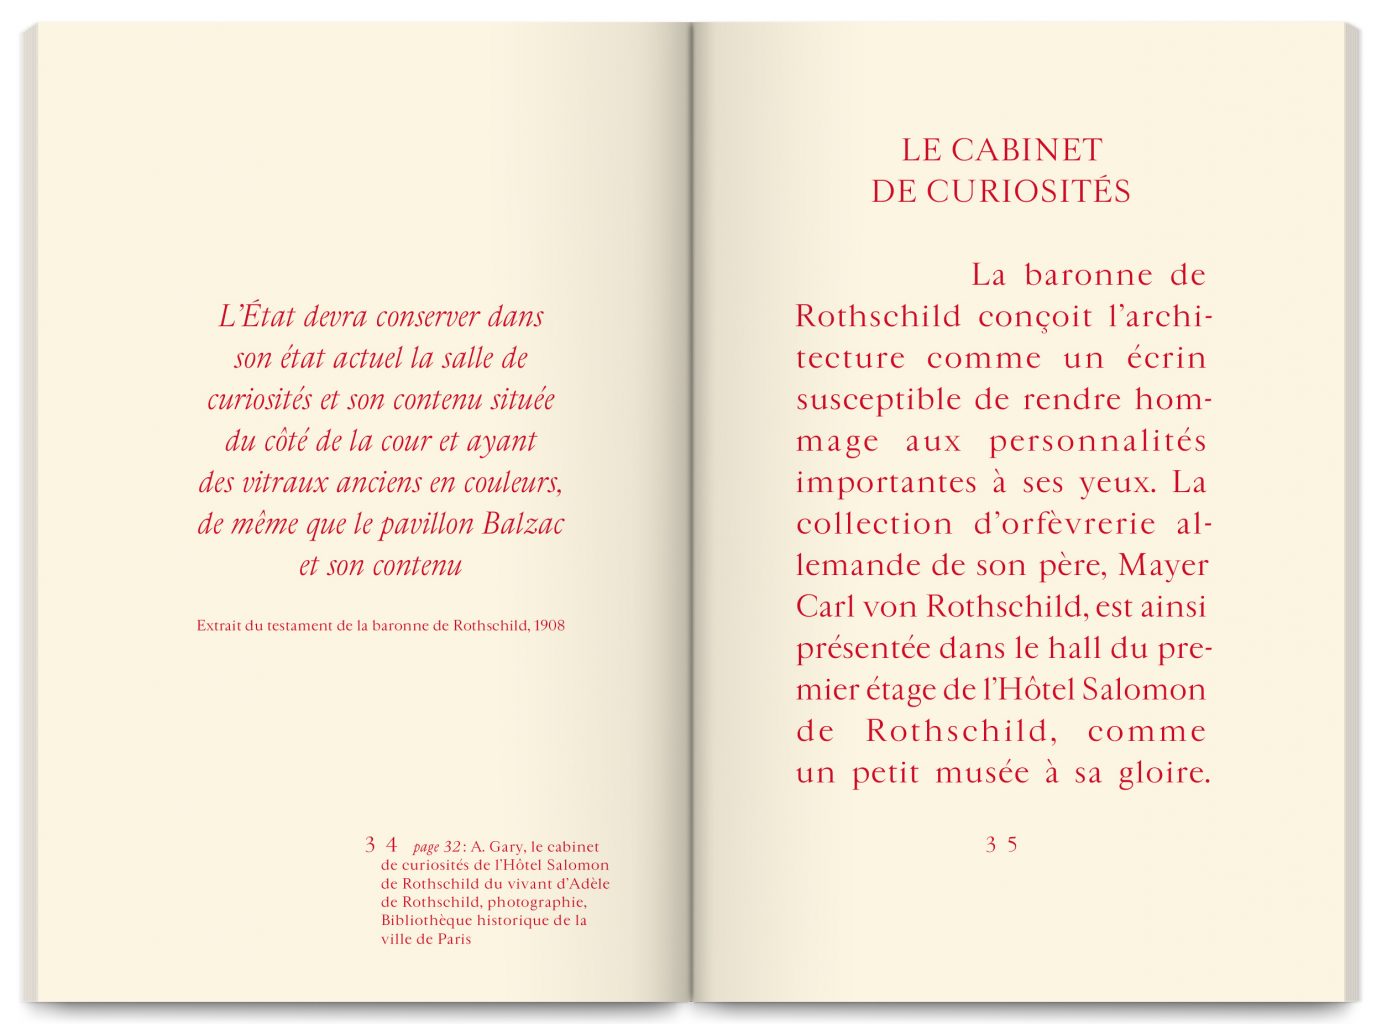 Publication Cabinet de curiosités – Hôtel Salomon de Rothschild, published by FNAGP, designed by In the shade of a tree studio, founded by Sophie Demay and Maël Fournier Comte.